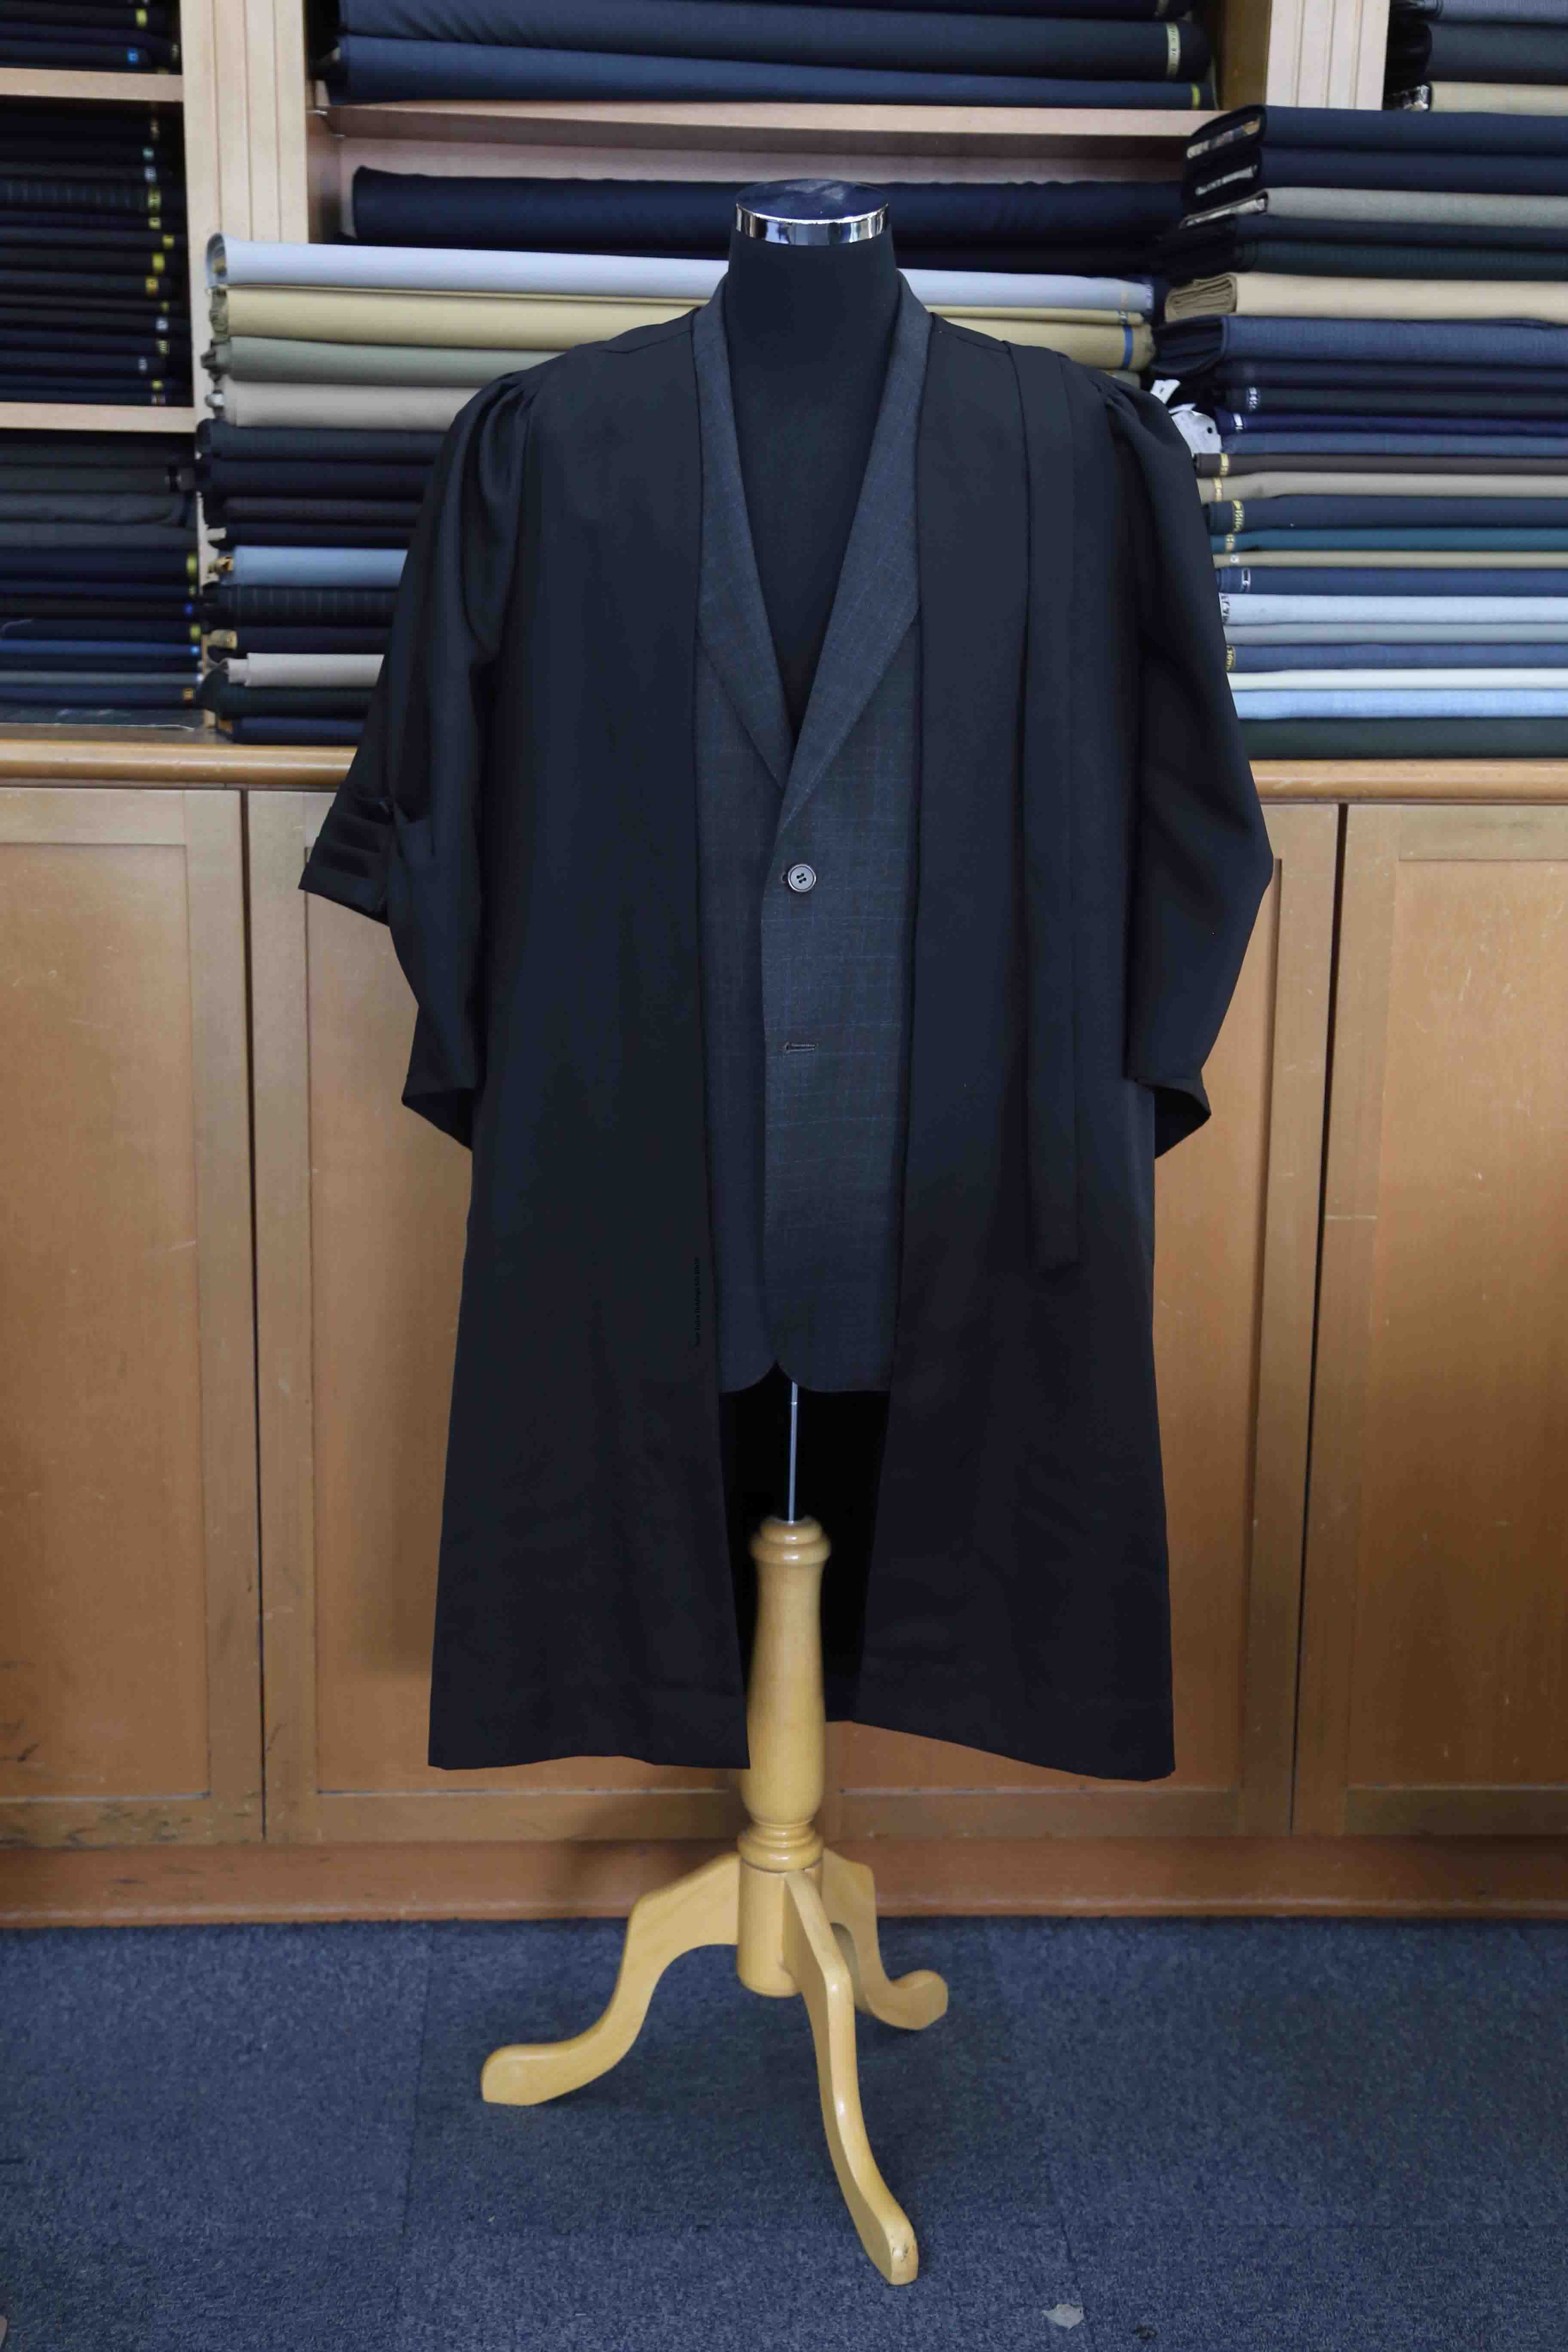 lawyer_gowns.jpg